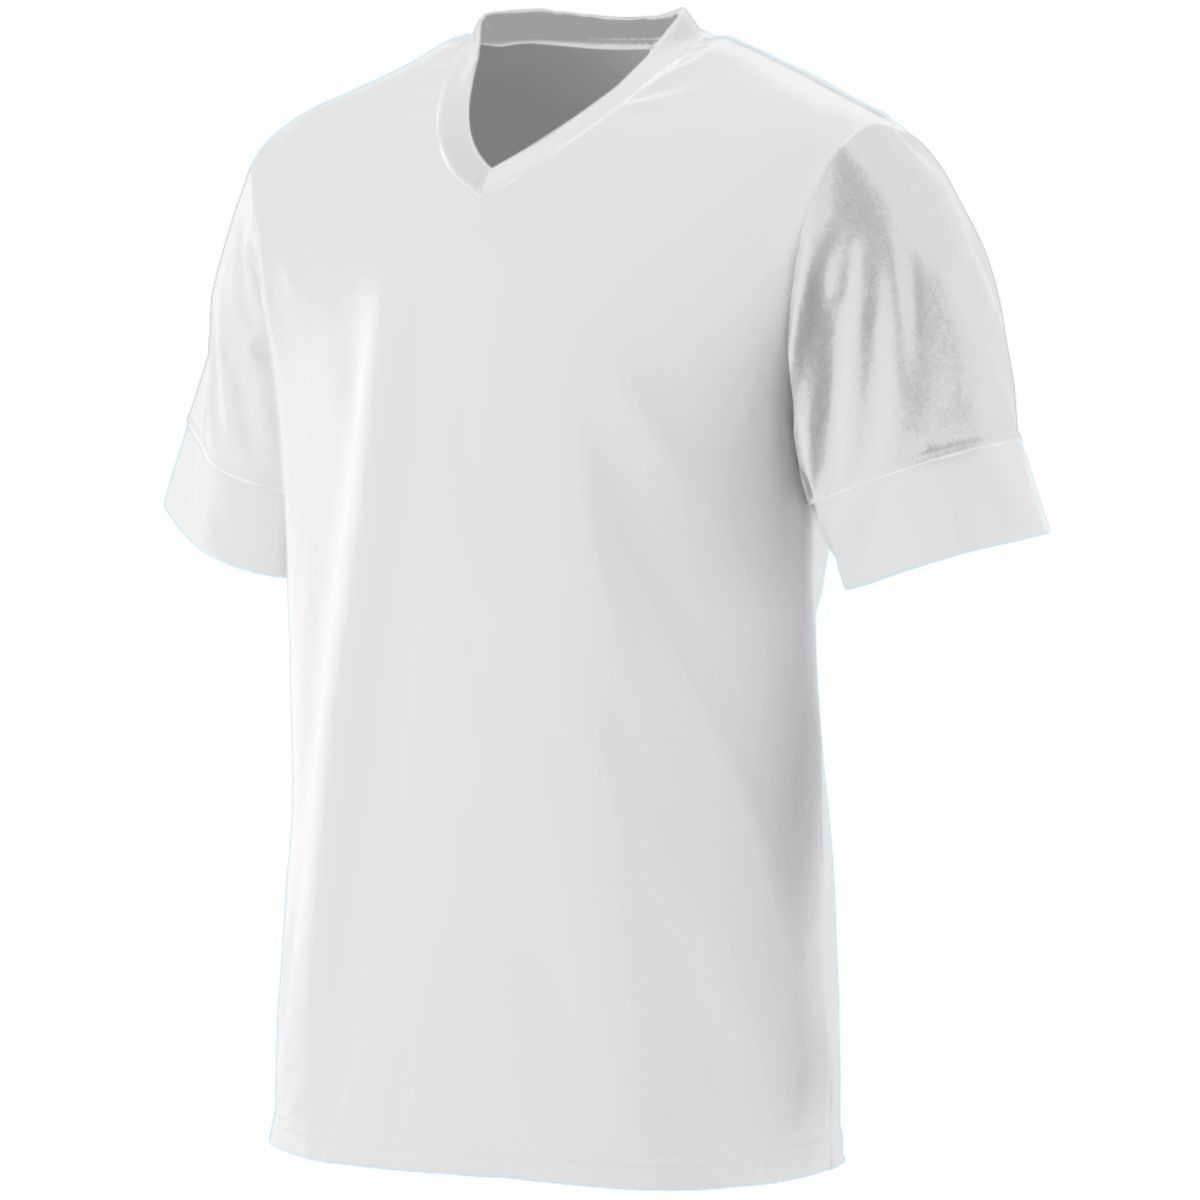 Augusta Sportswear Youth Lightning Jersey in White/White  -Part of the Youth, Youth-Jersey, Augusta-Products, Soccer, Shirts, All-Sports-1 product lines at KanaleyCreations.com